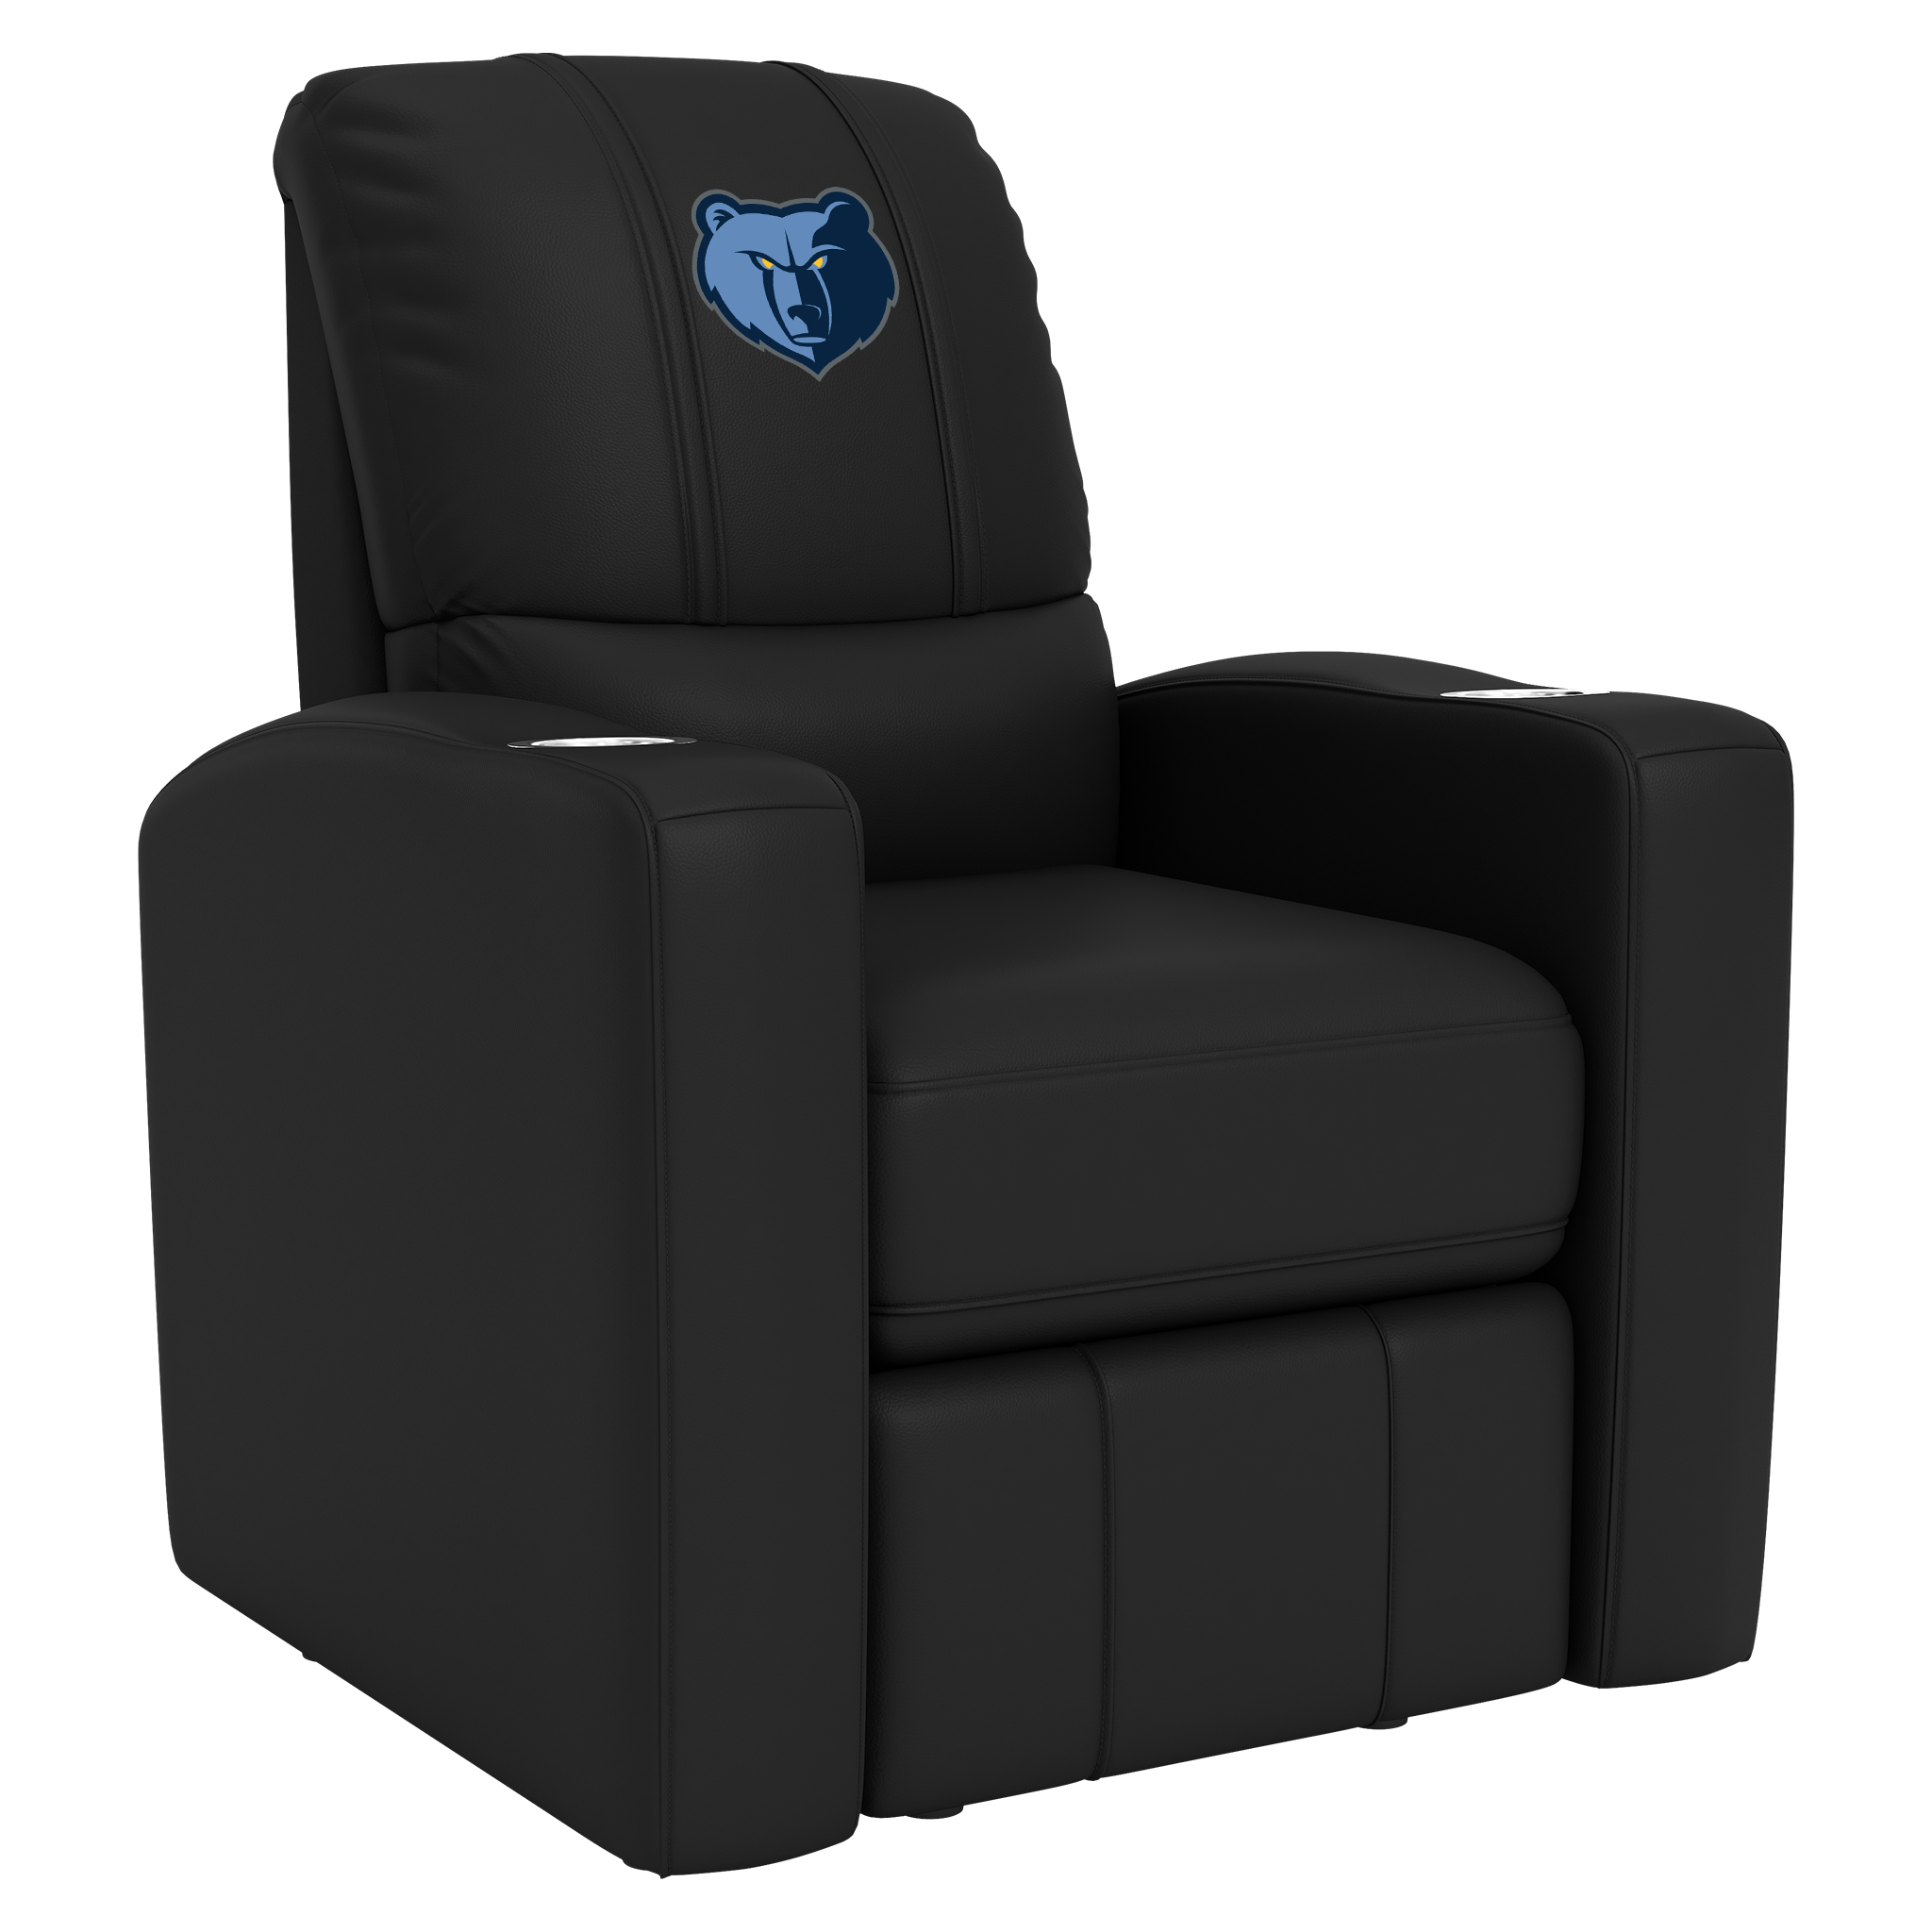 Memphis Grizzlies Stealth Recliner with Memphis Grizzlies Primary Logo